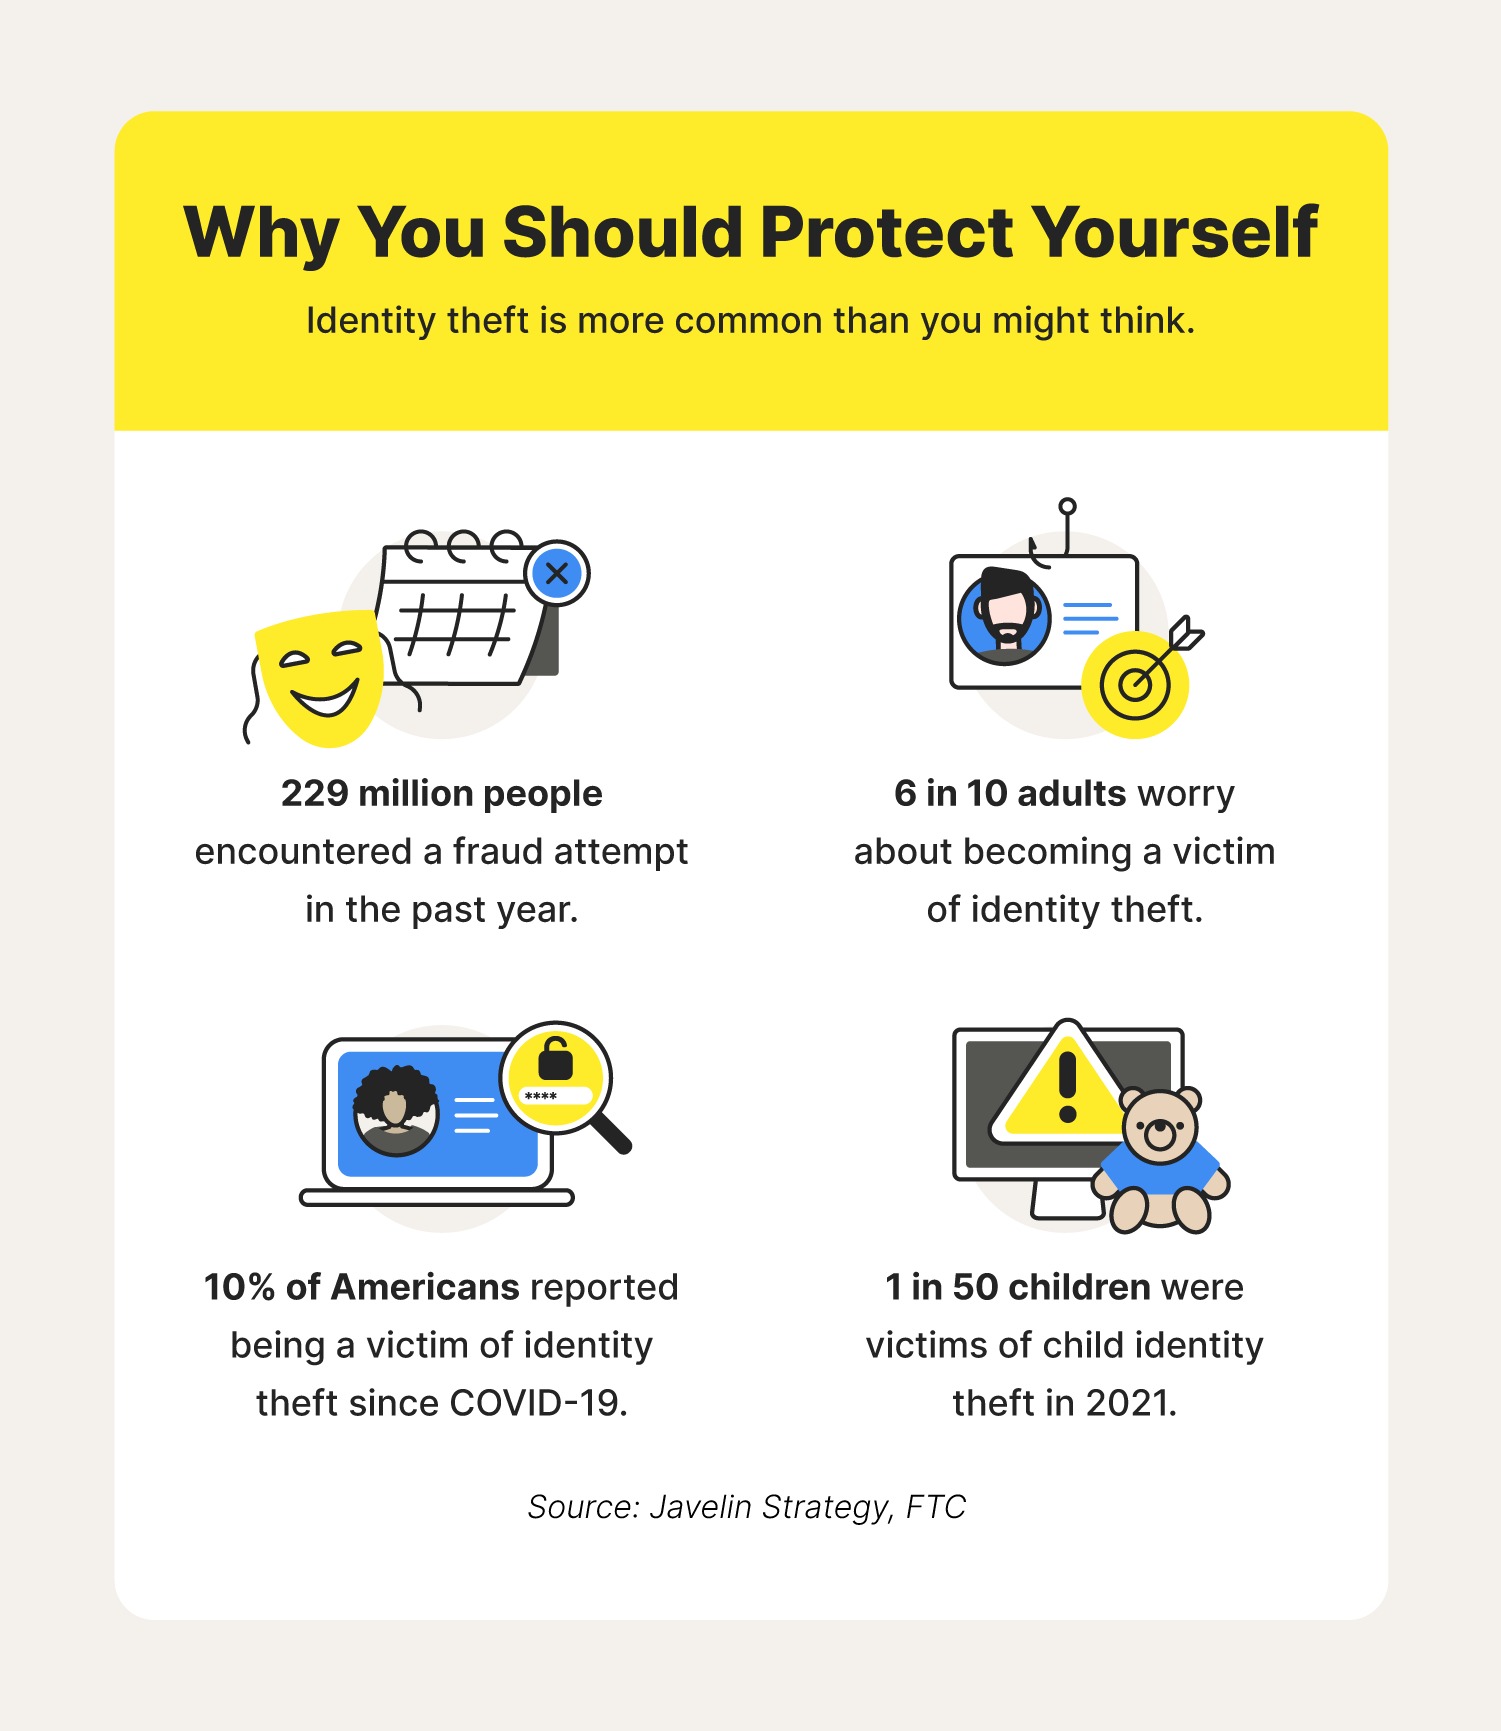 Why you should protect yourself